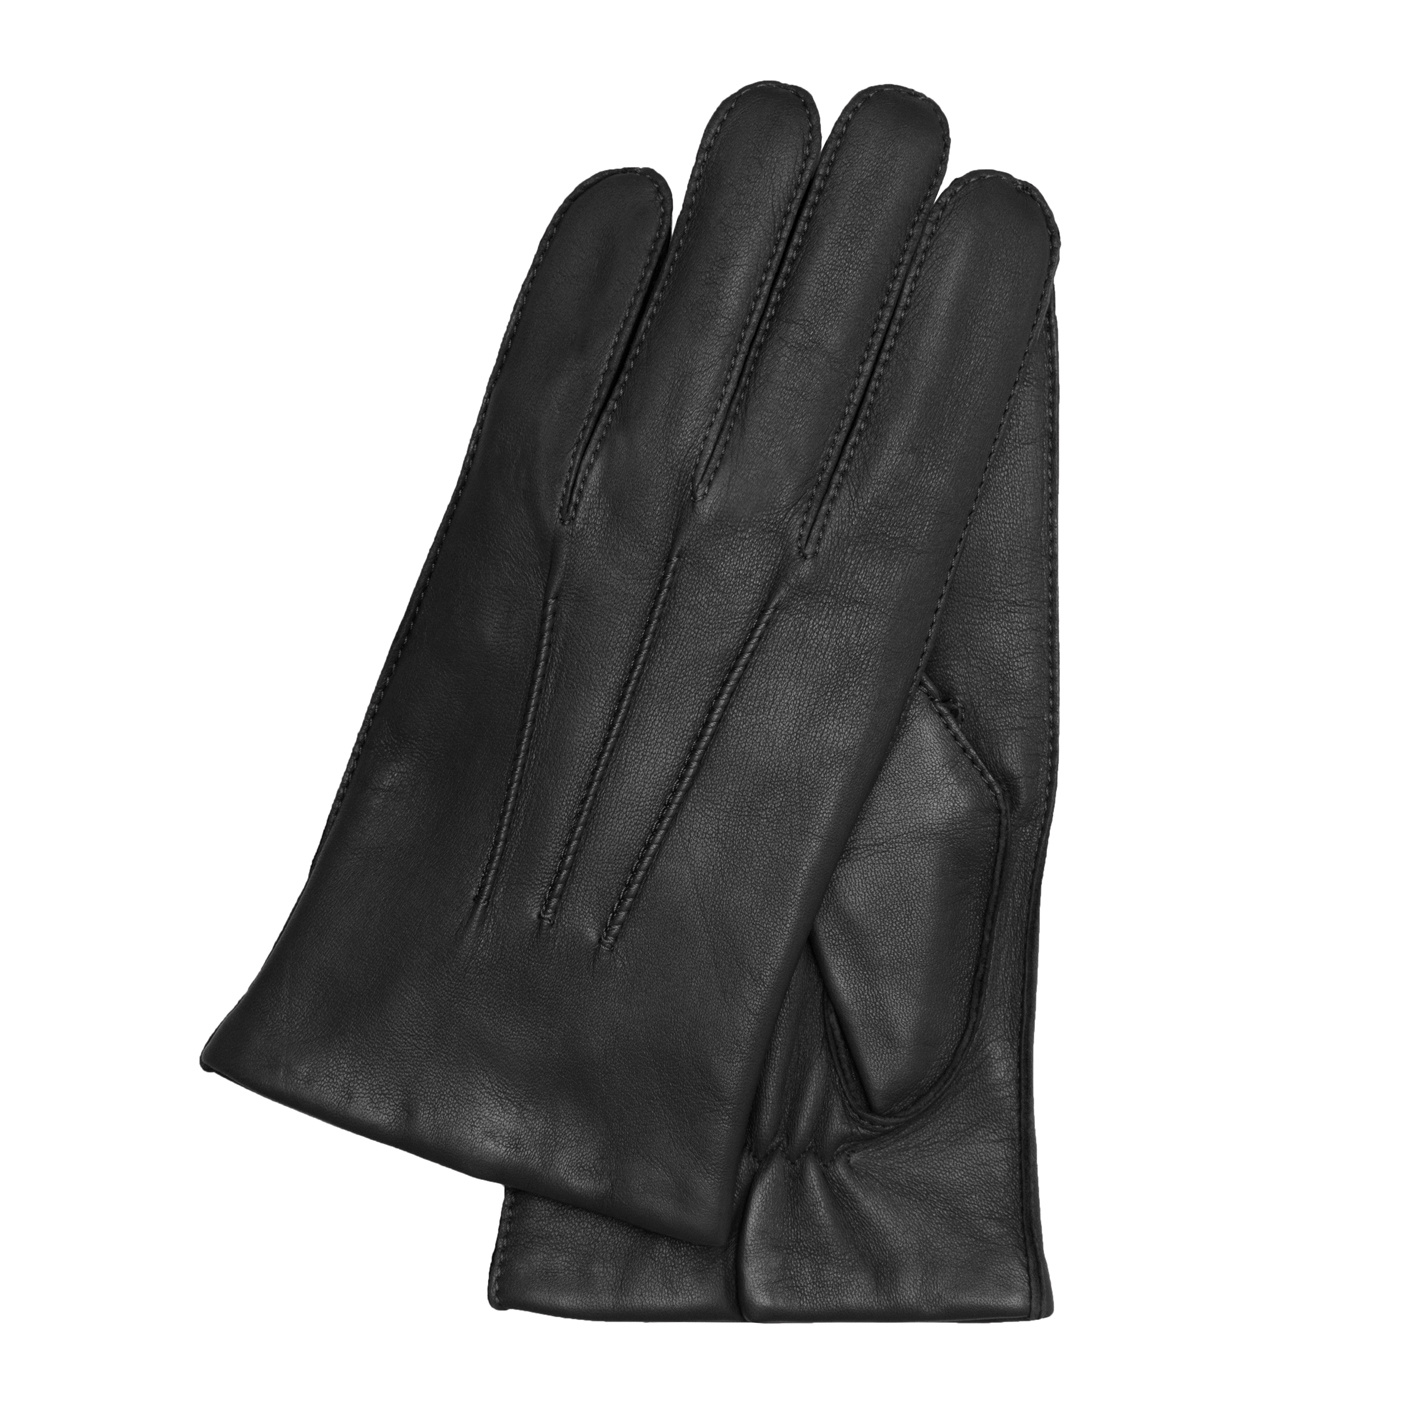 Black Leather Glove - Kessler - M Boots by